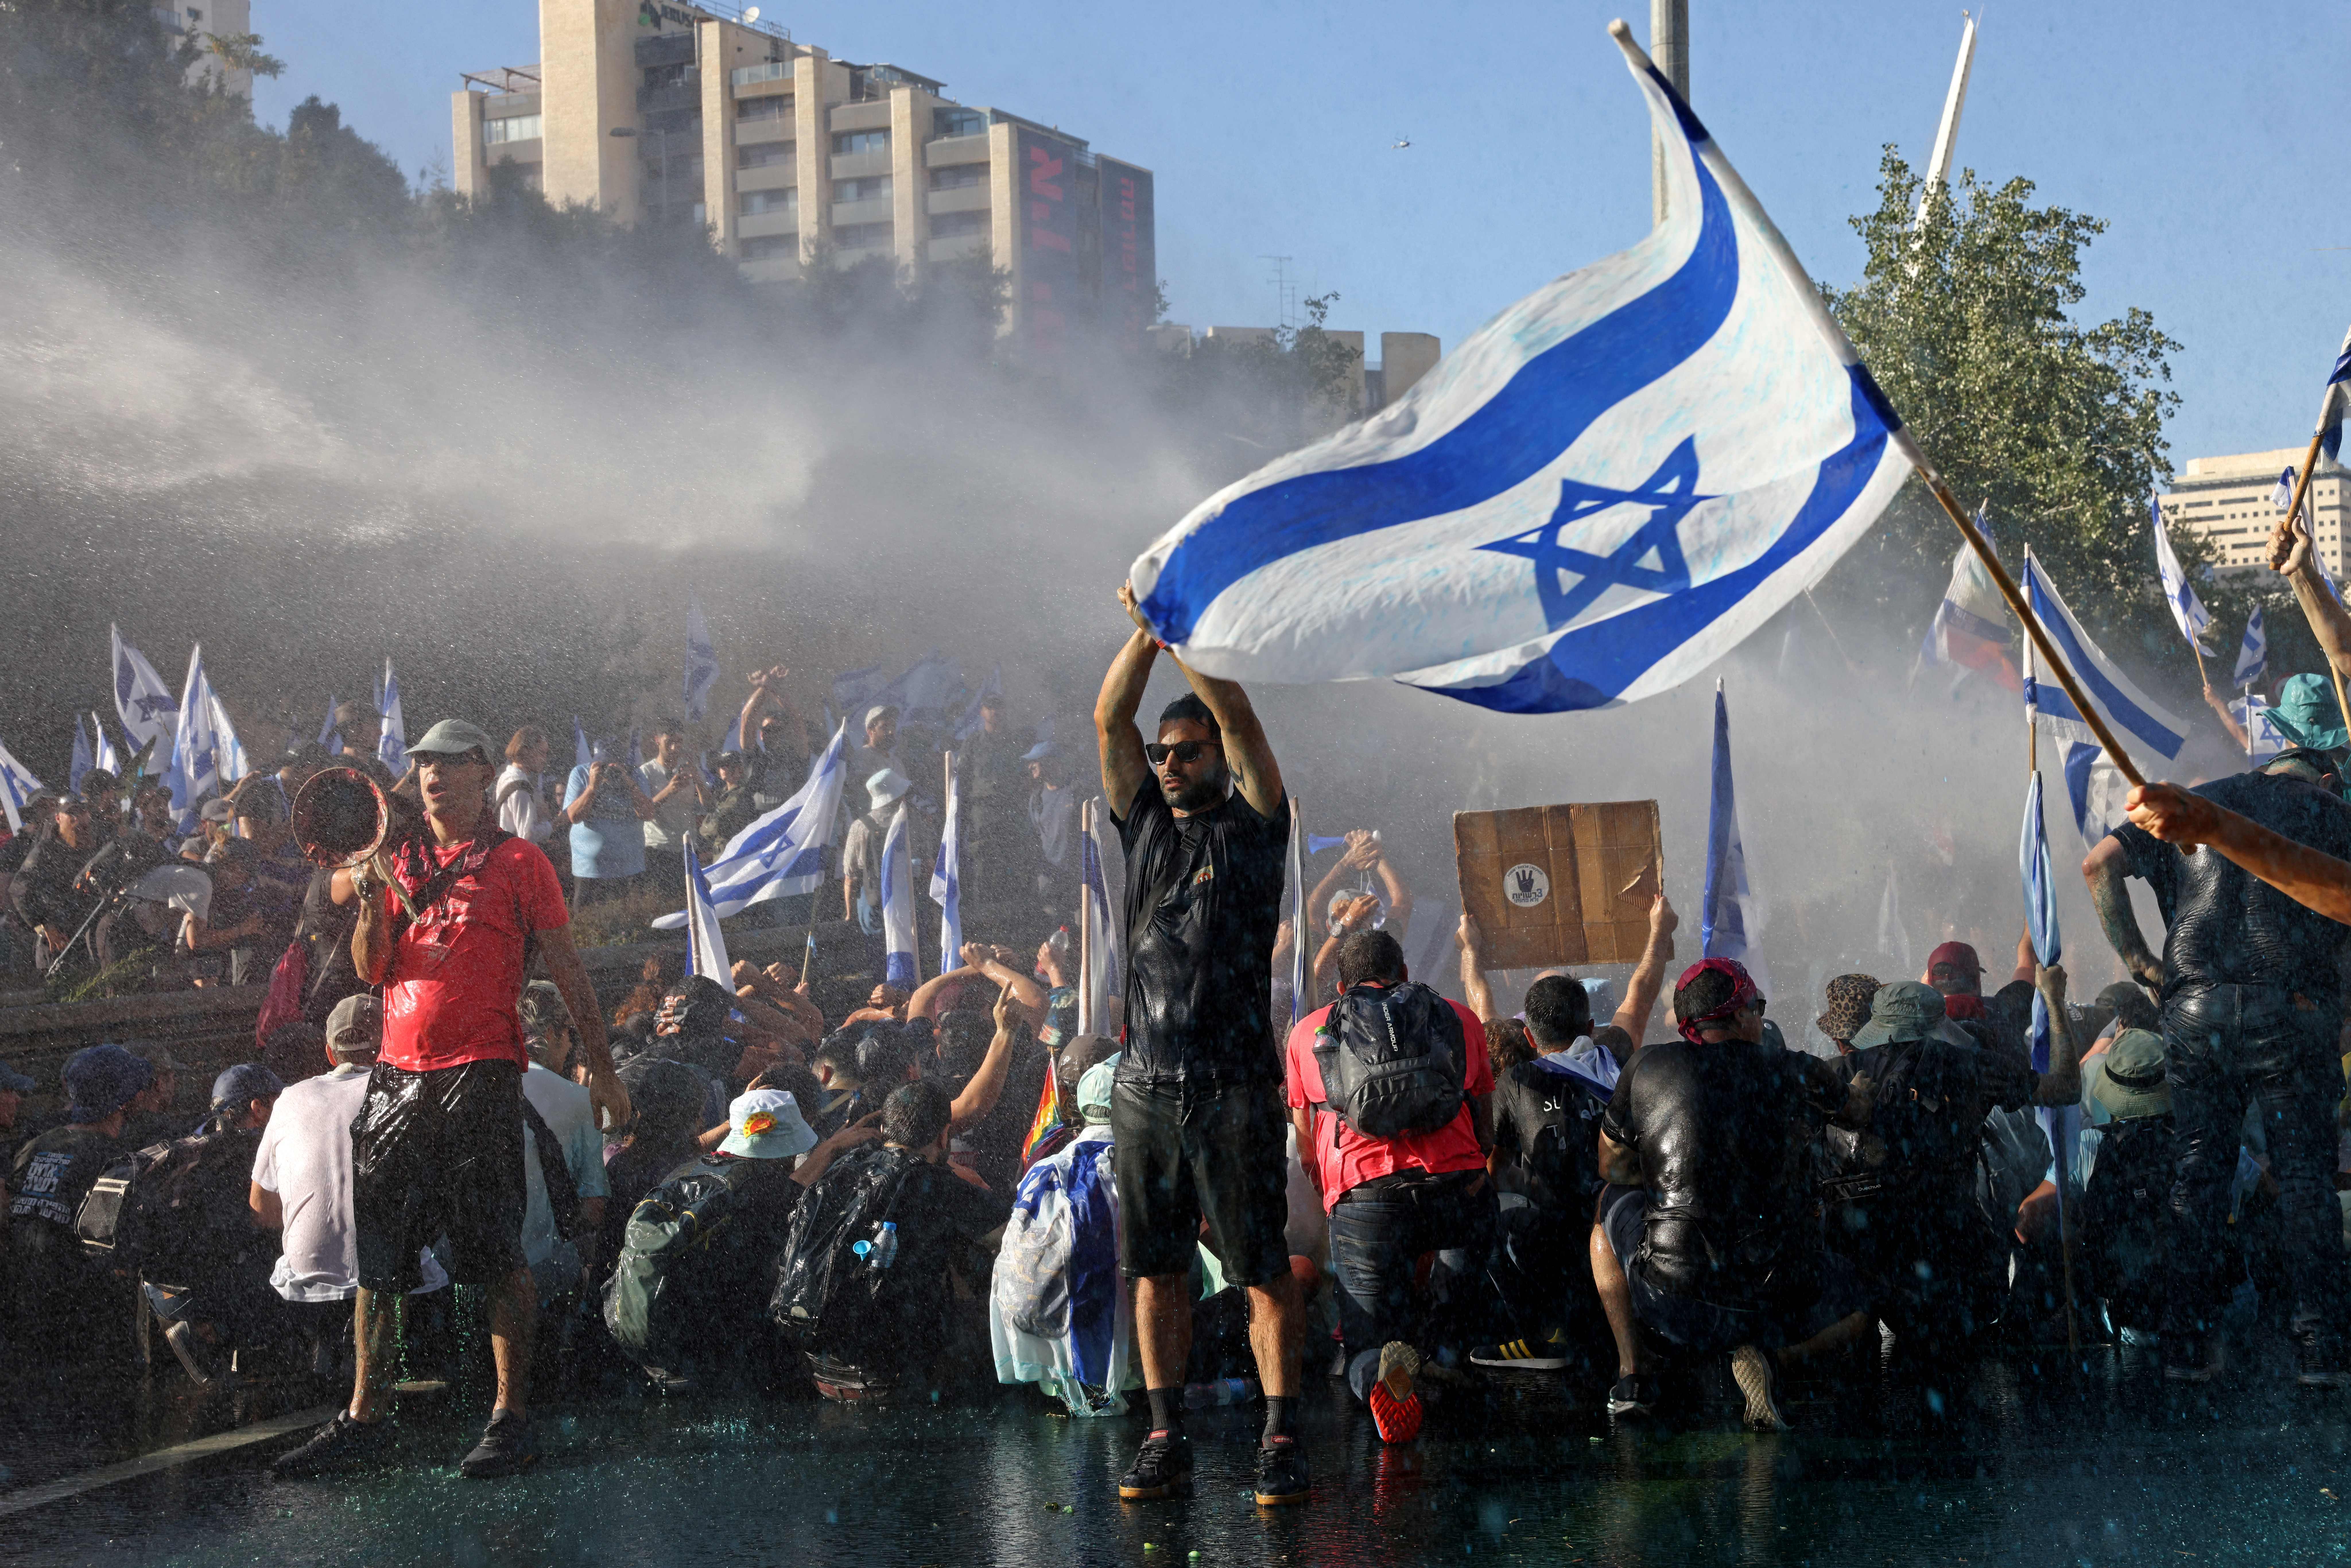 A mass of protesters, many holding Israel flags, are sprayed with water